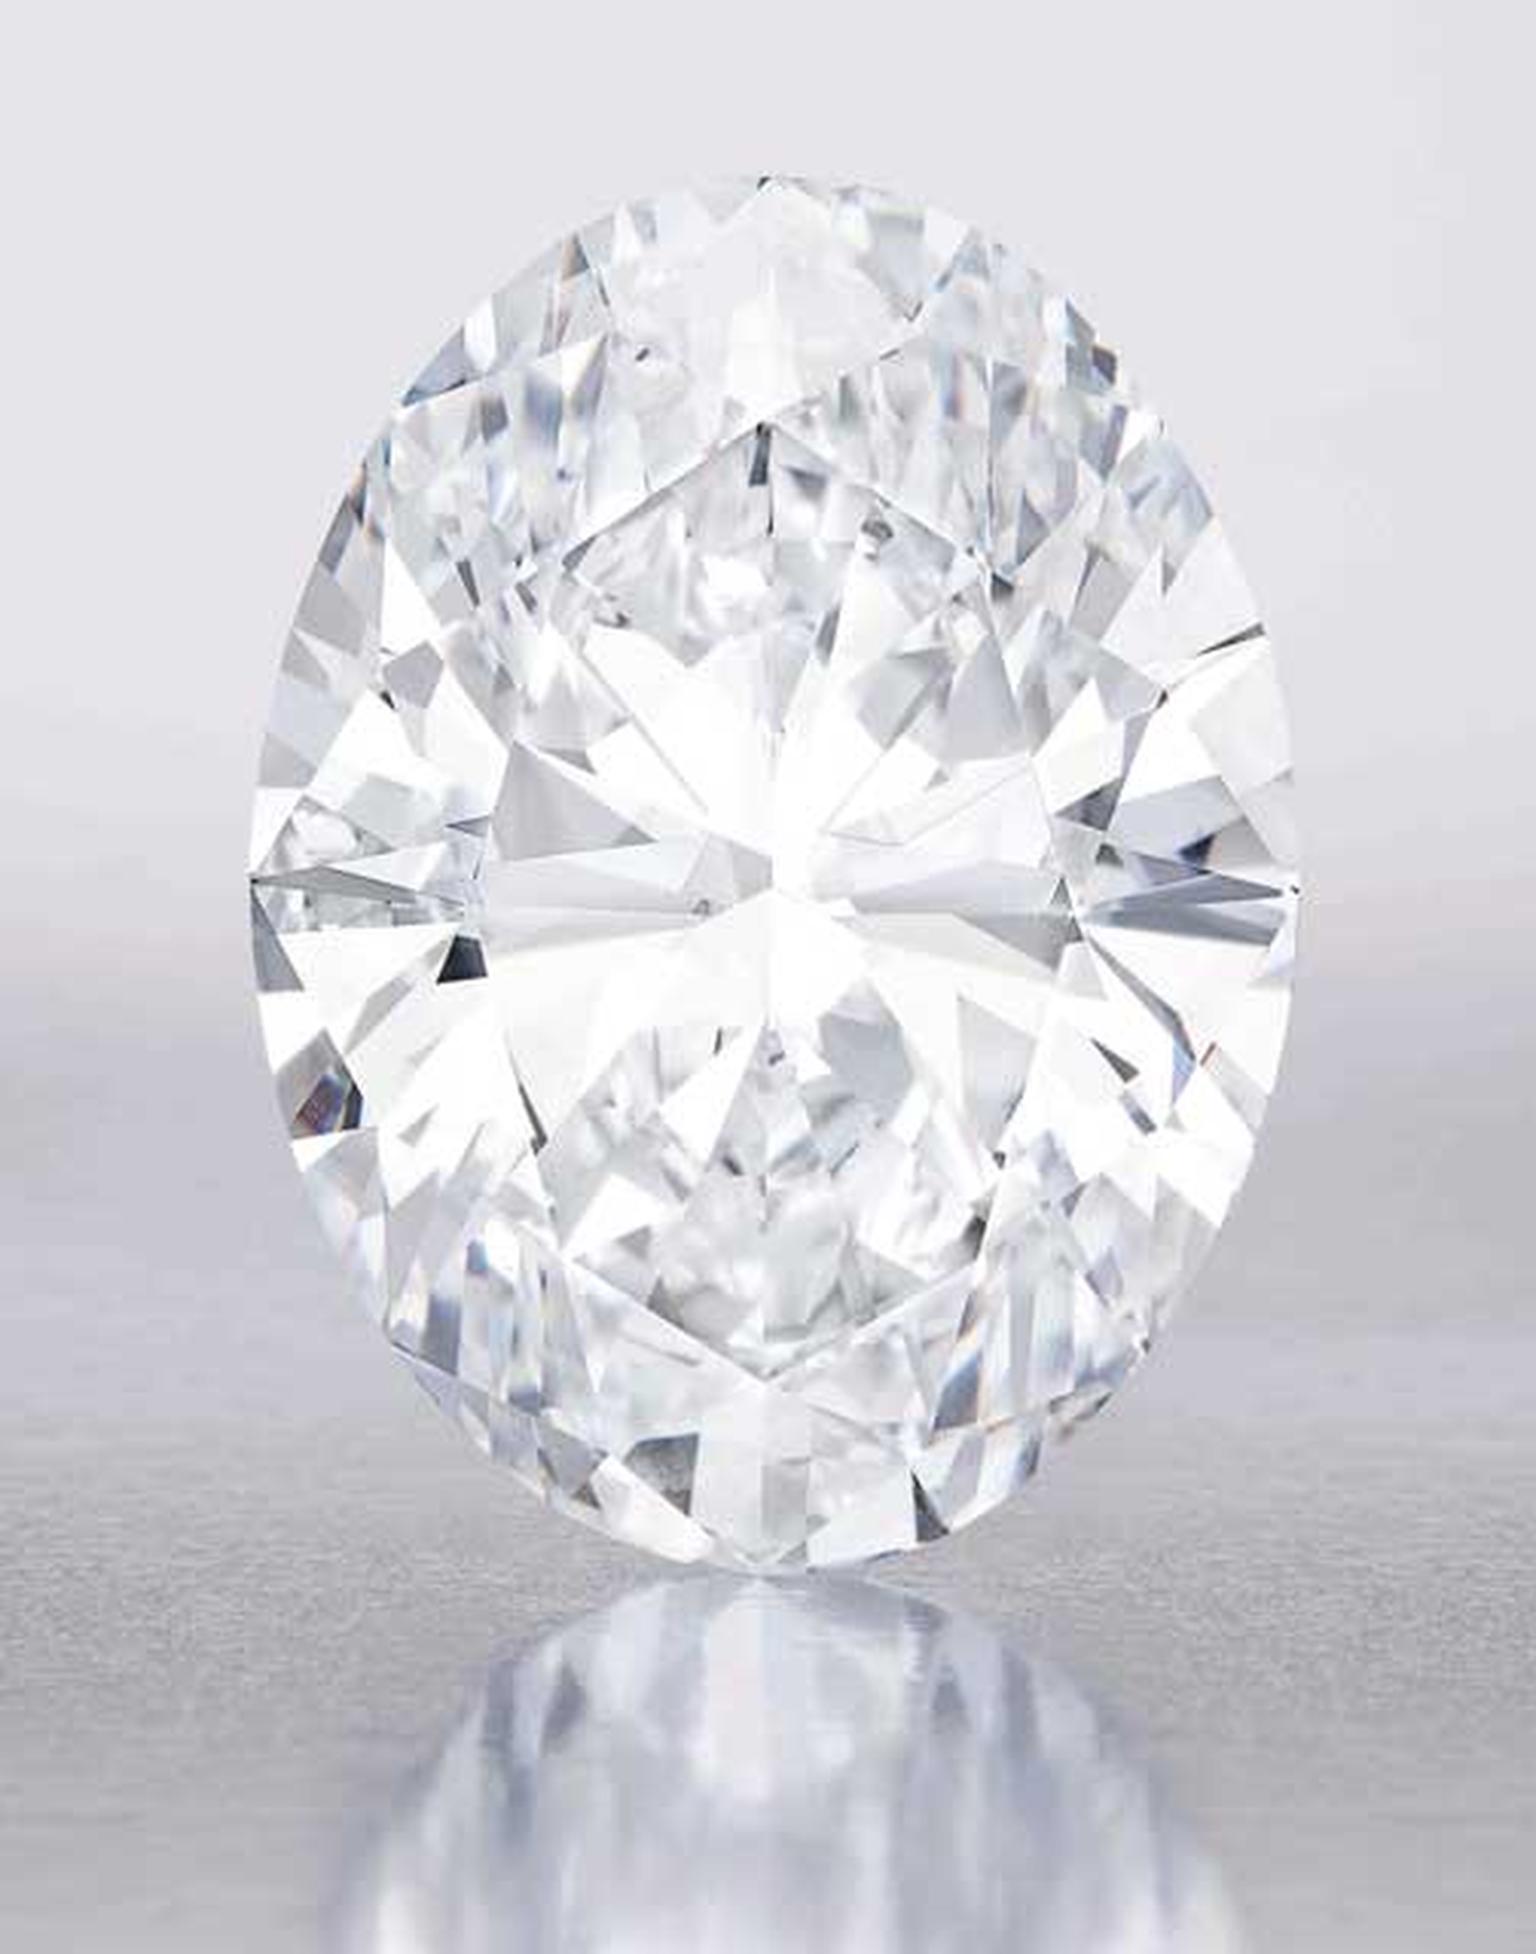 This flawless Oval diamond sold at Sotheby's Hong Kong in October 2013 for $30.6m, taking the world record for the highest price ever paid for a colourless diamond at auction.